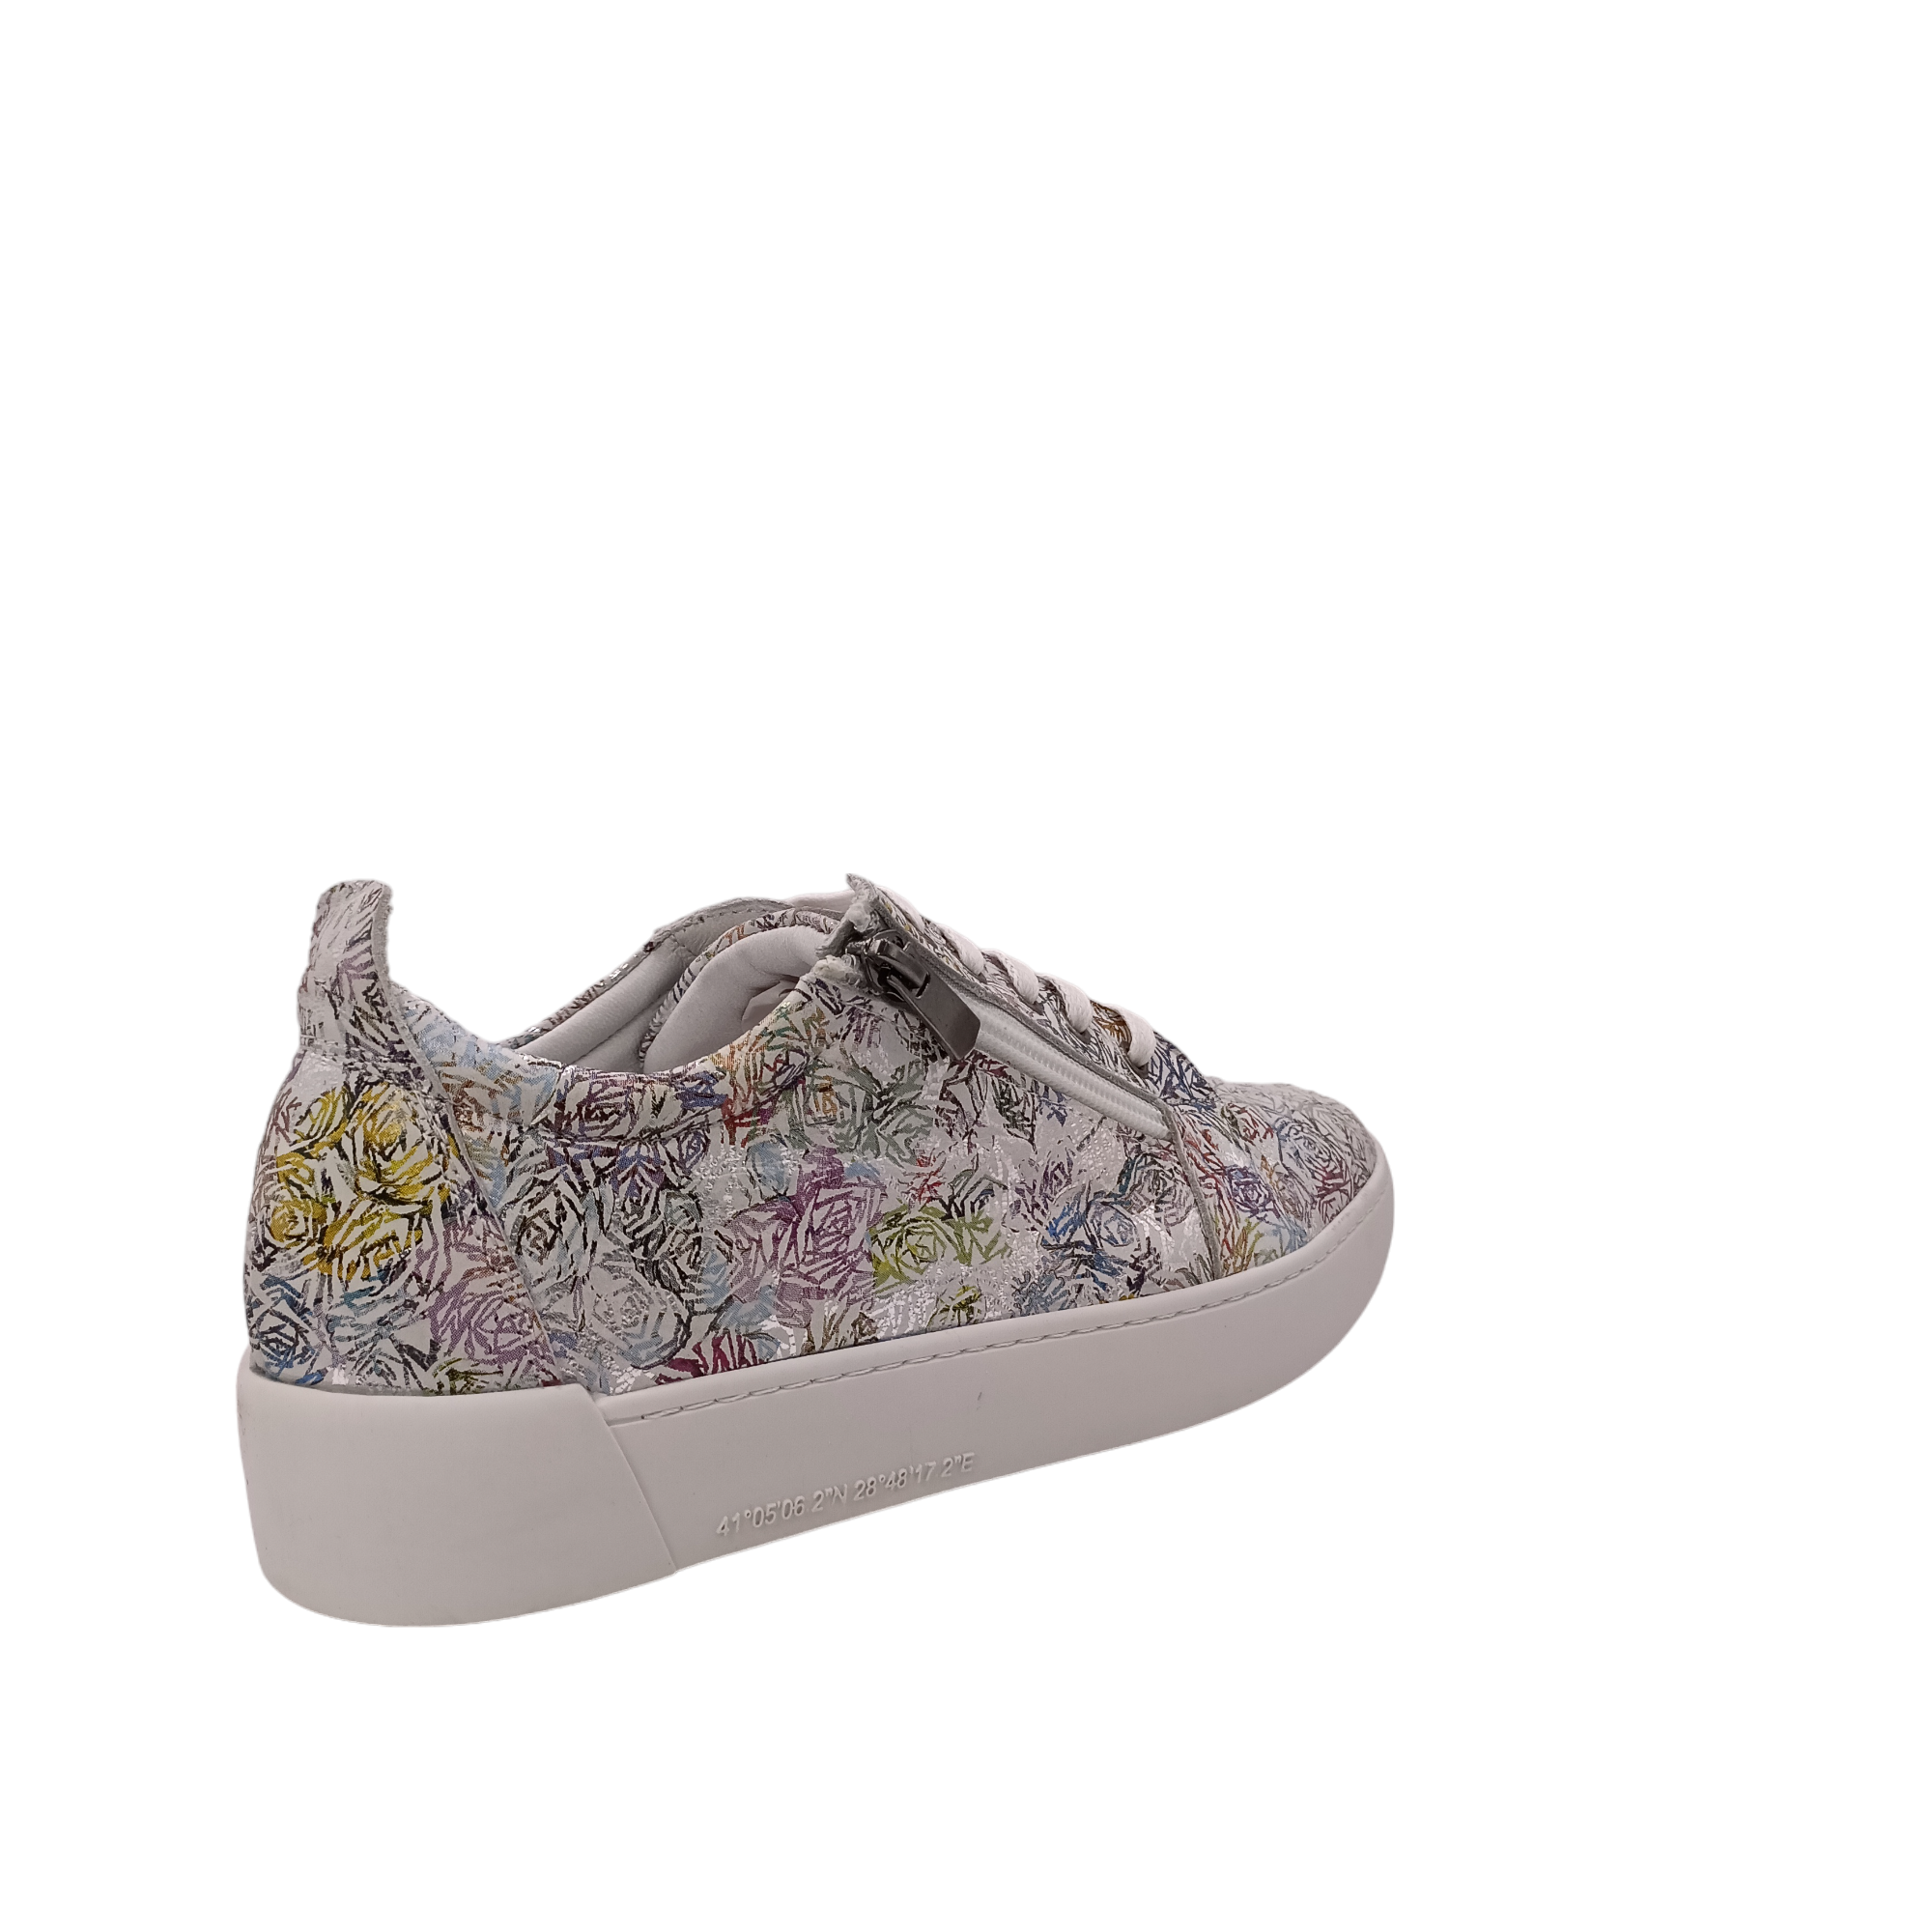 Side angle view of Tarzan Leather printed shoe with floral outlines, multi coloured print. White laces and sole. Shop Womens Rilassare Shoes Online and IN-store with shoe&amp;me NZ